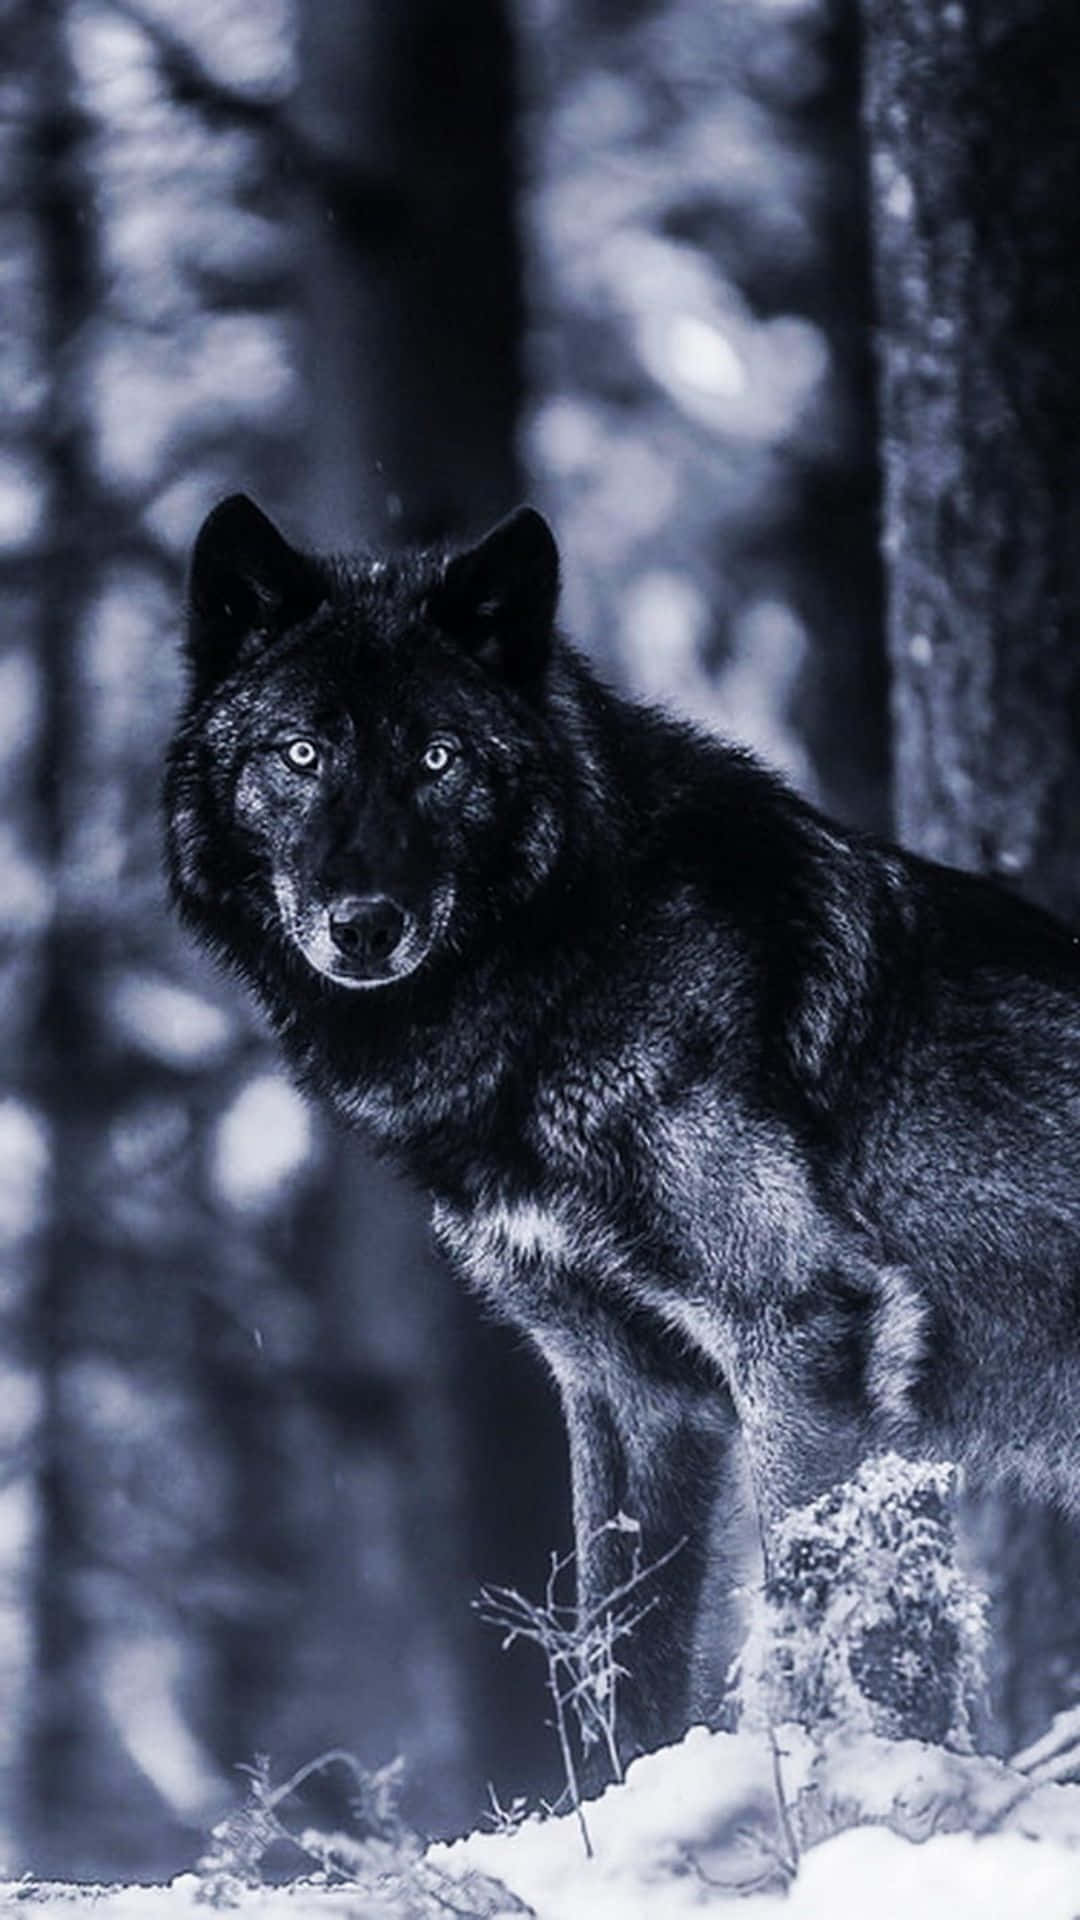 Captivating Alpha Wolf Staring Intently Wallpaper